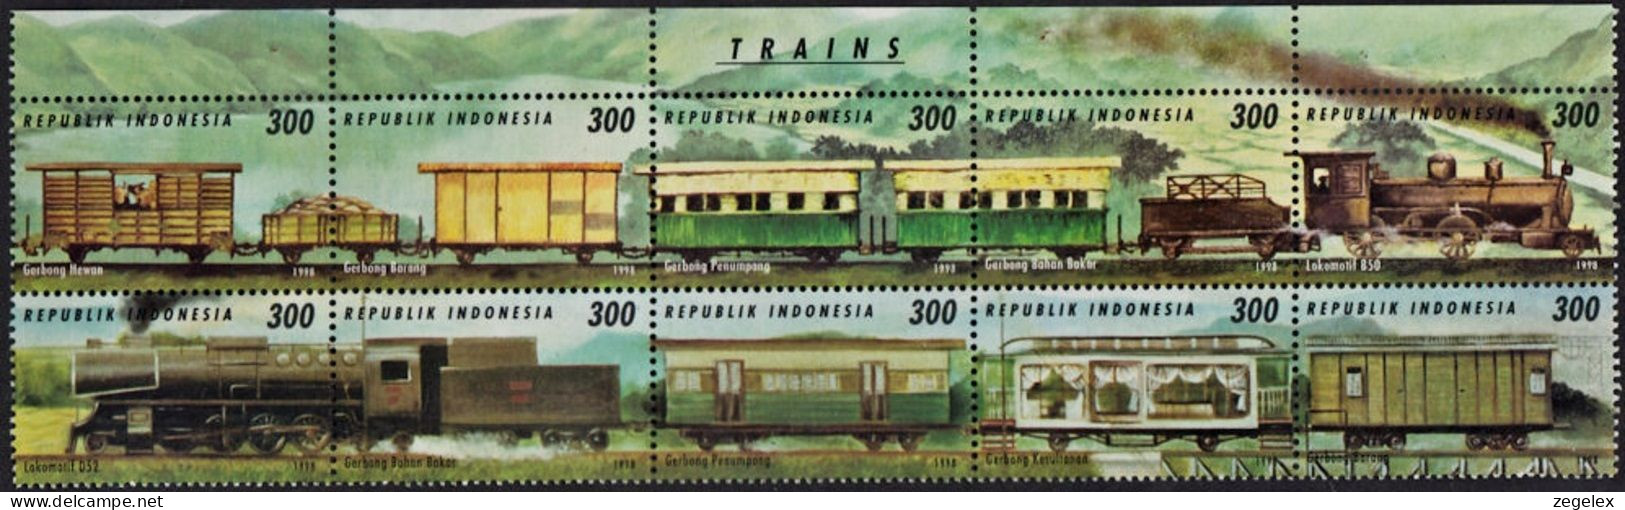 Indonesia 1998 Trains MNH ** ZBL 1877/1886 - Indonesia